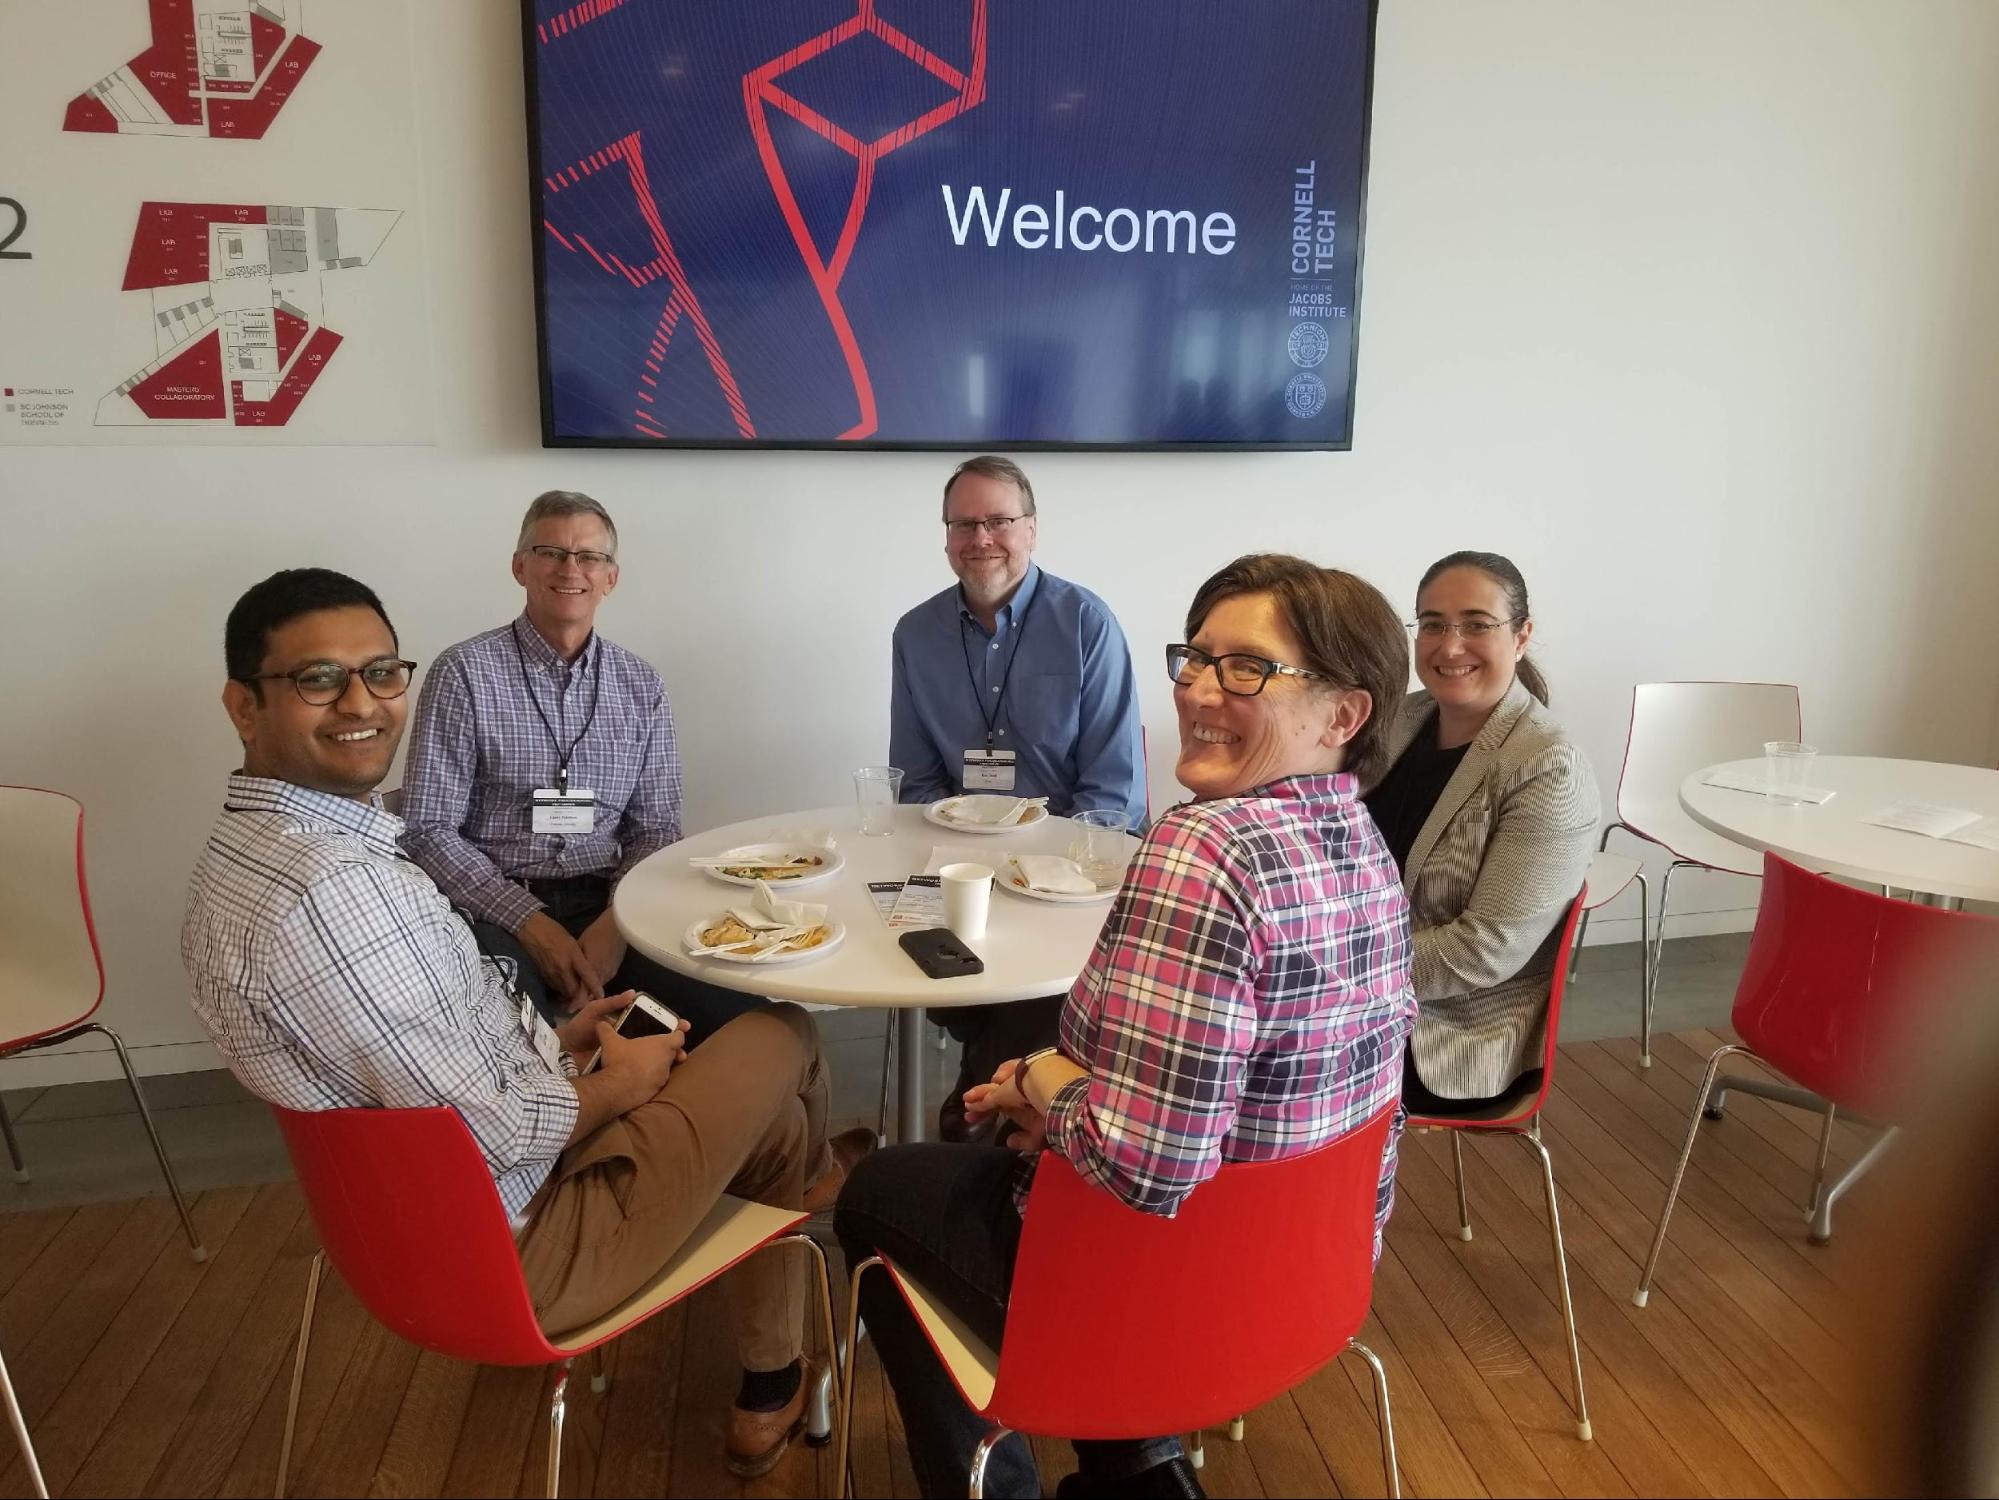 Co-director Prof. Jen Rexford meets with invited guests from the telecom industry during the morning break. Clockwise from left: Akhil Gokul (Ericsson), Larry Petersen (ONF), Ken Duell (AT&T), Raquel Morera (Verizon) and Jen Rexford (Princeton).